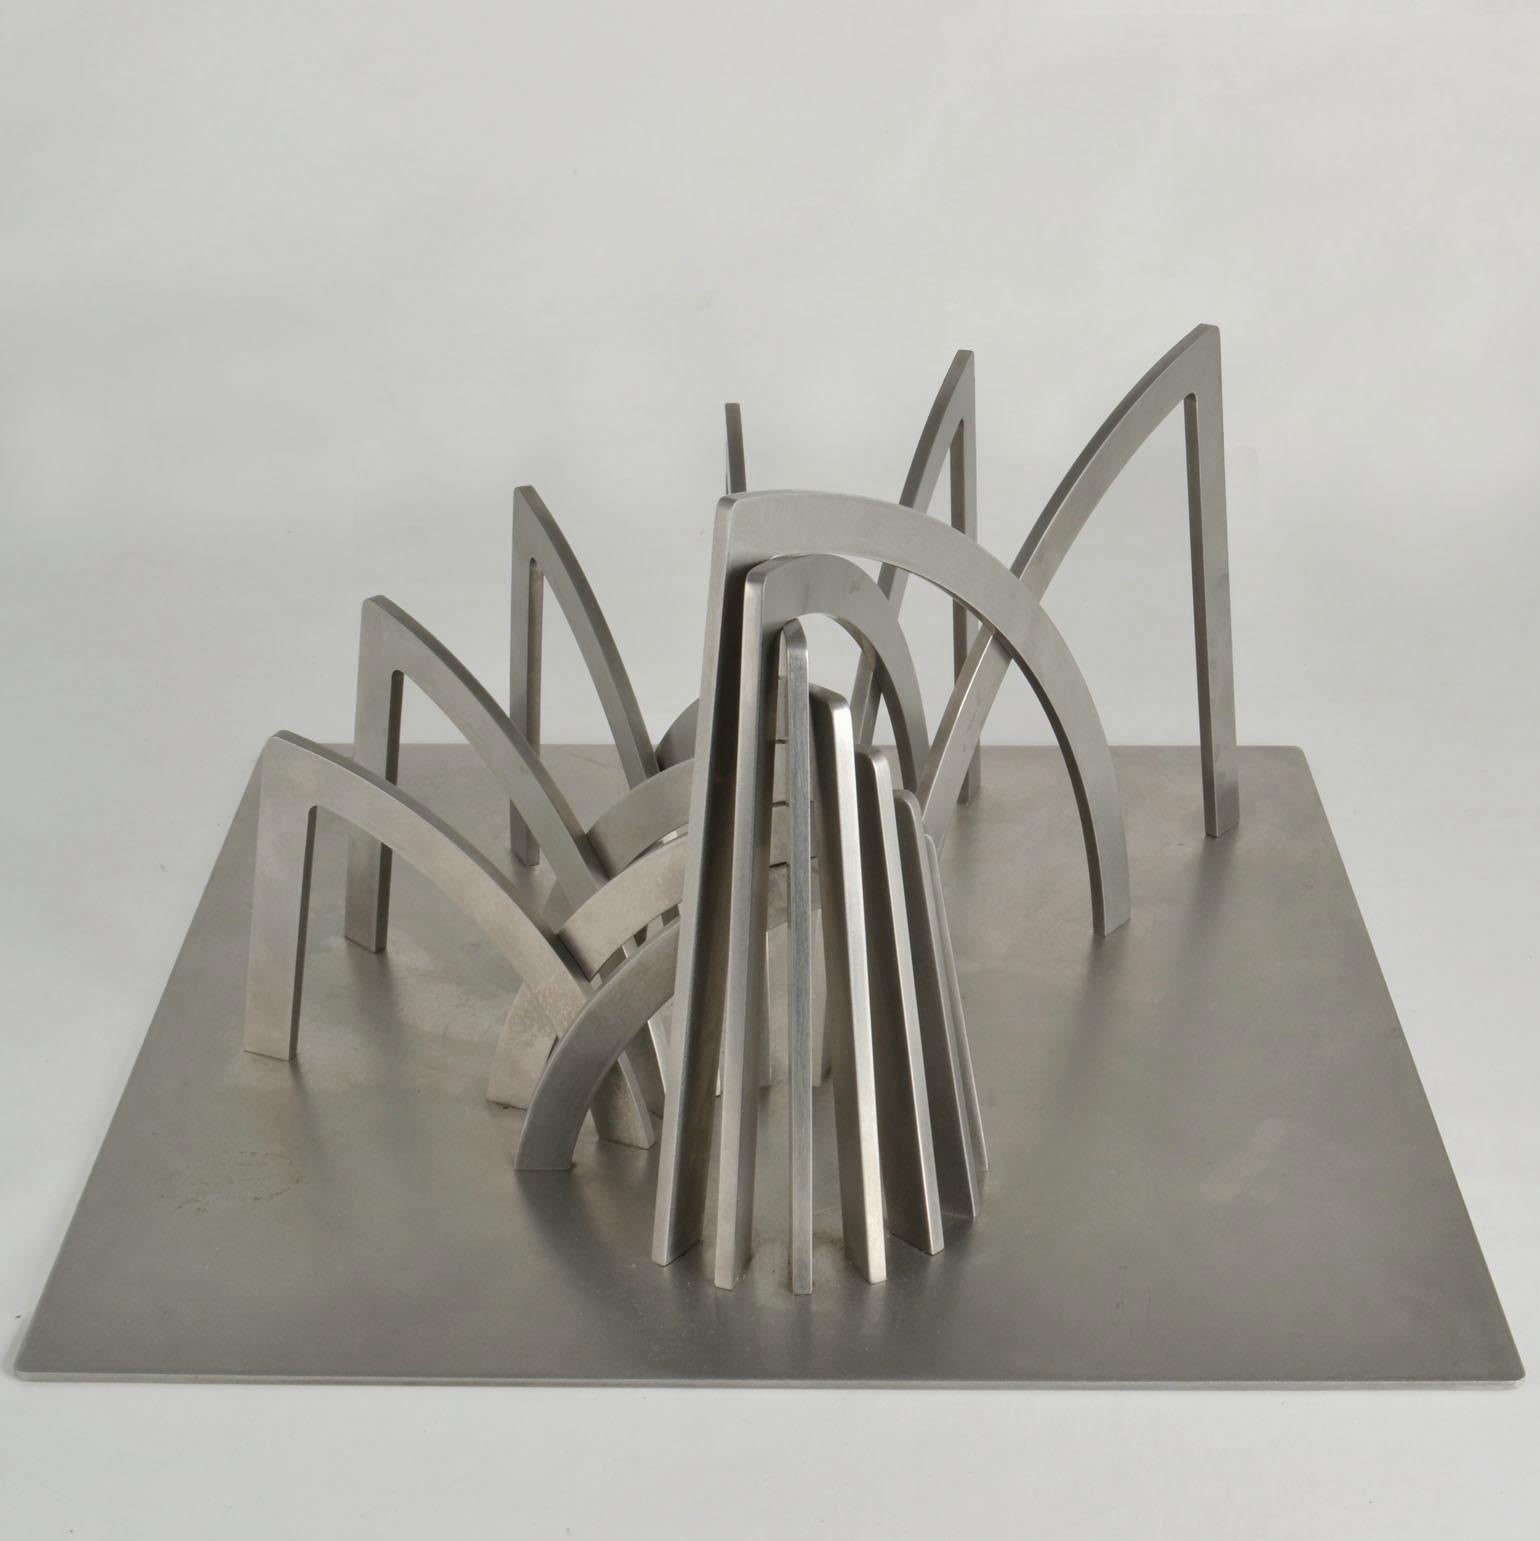 Monumental abstract sculpture in stainless steel by Margot Zanstra (Dutch, 1919–2010) stands on a brushed stainless steel base. This sculpture most likely is a model for an outdoor sculpture, the first step towards a commission that may have been